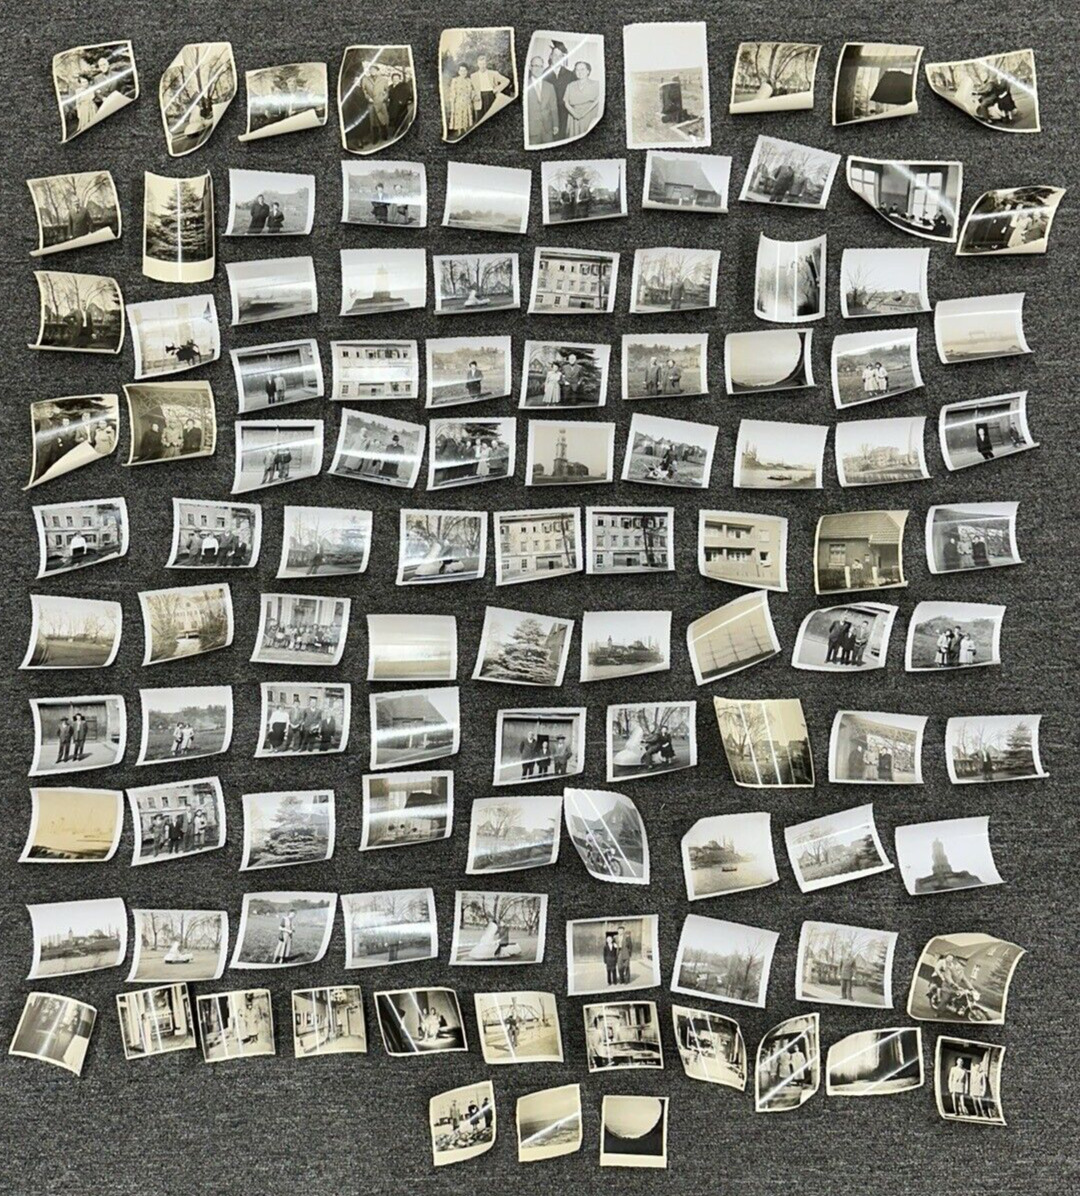 Huge Lot of 103 Vintage 1930s-50s Real Photos Photographs ~ Black & White